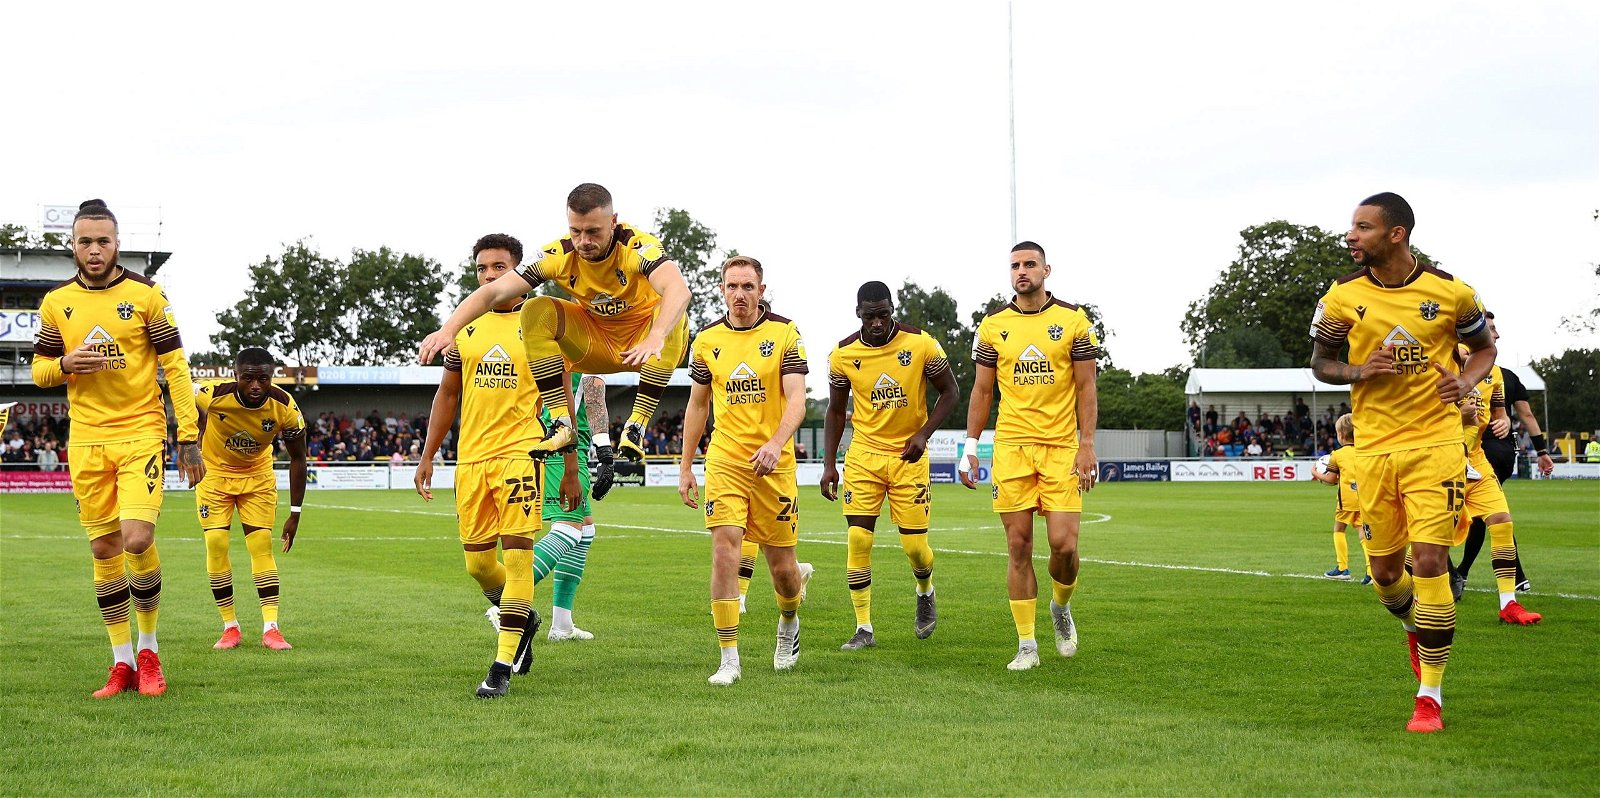 Sutton, Sutton United fans&#8217; guide to Colchester clash &#8211; Injuries, expected XI, how to watch